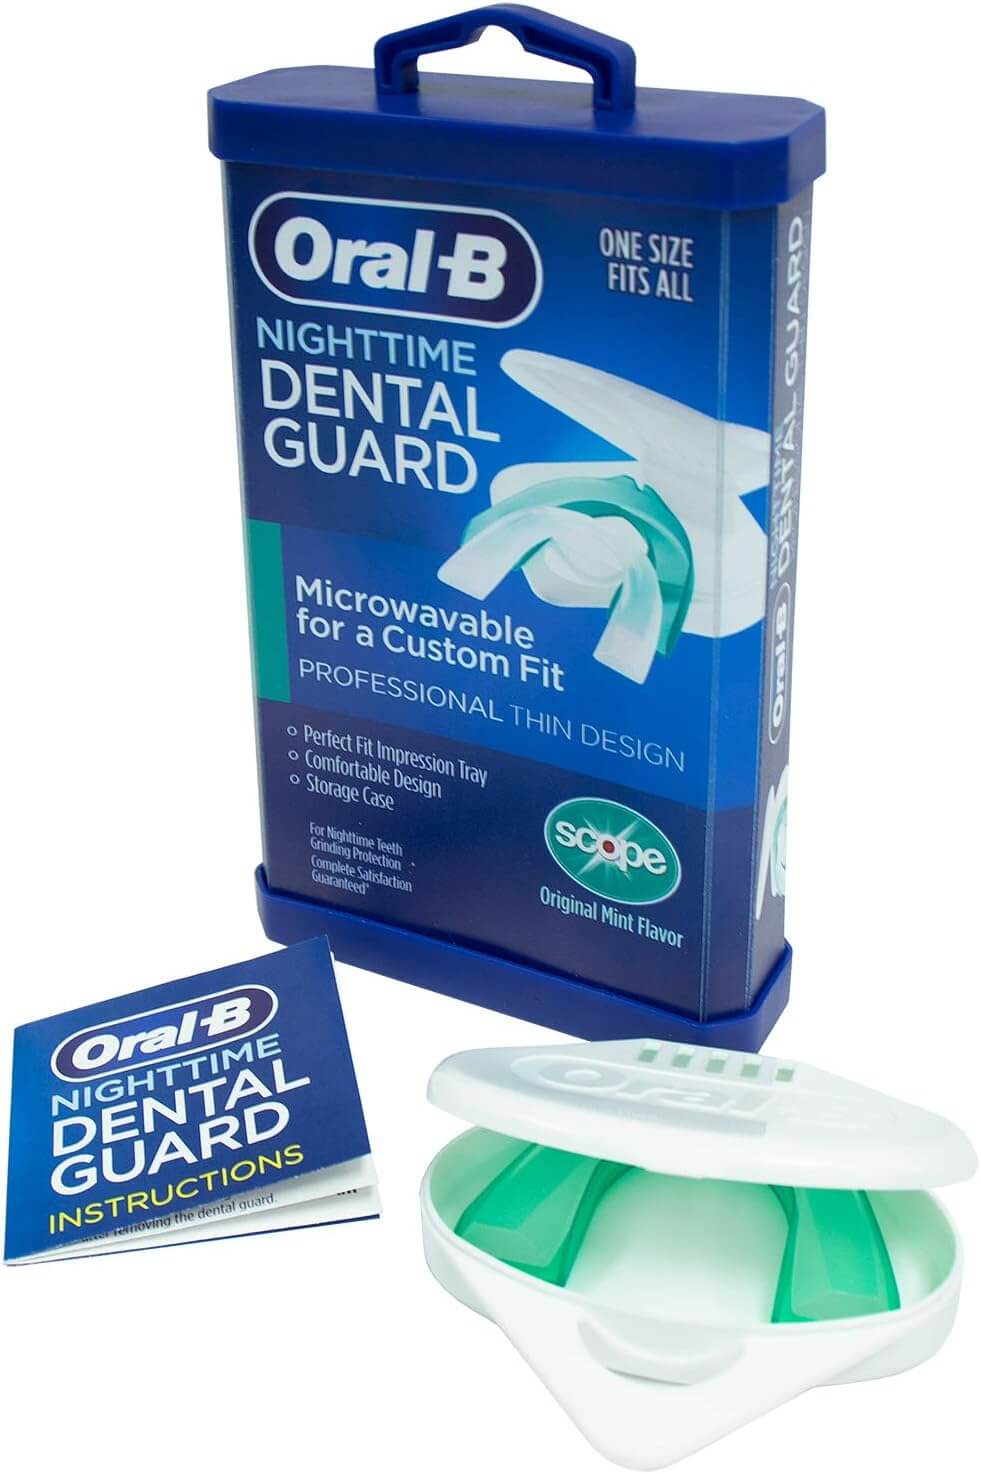 Oral-B Nighttime Dental Guard with Scope